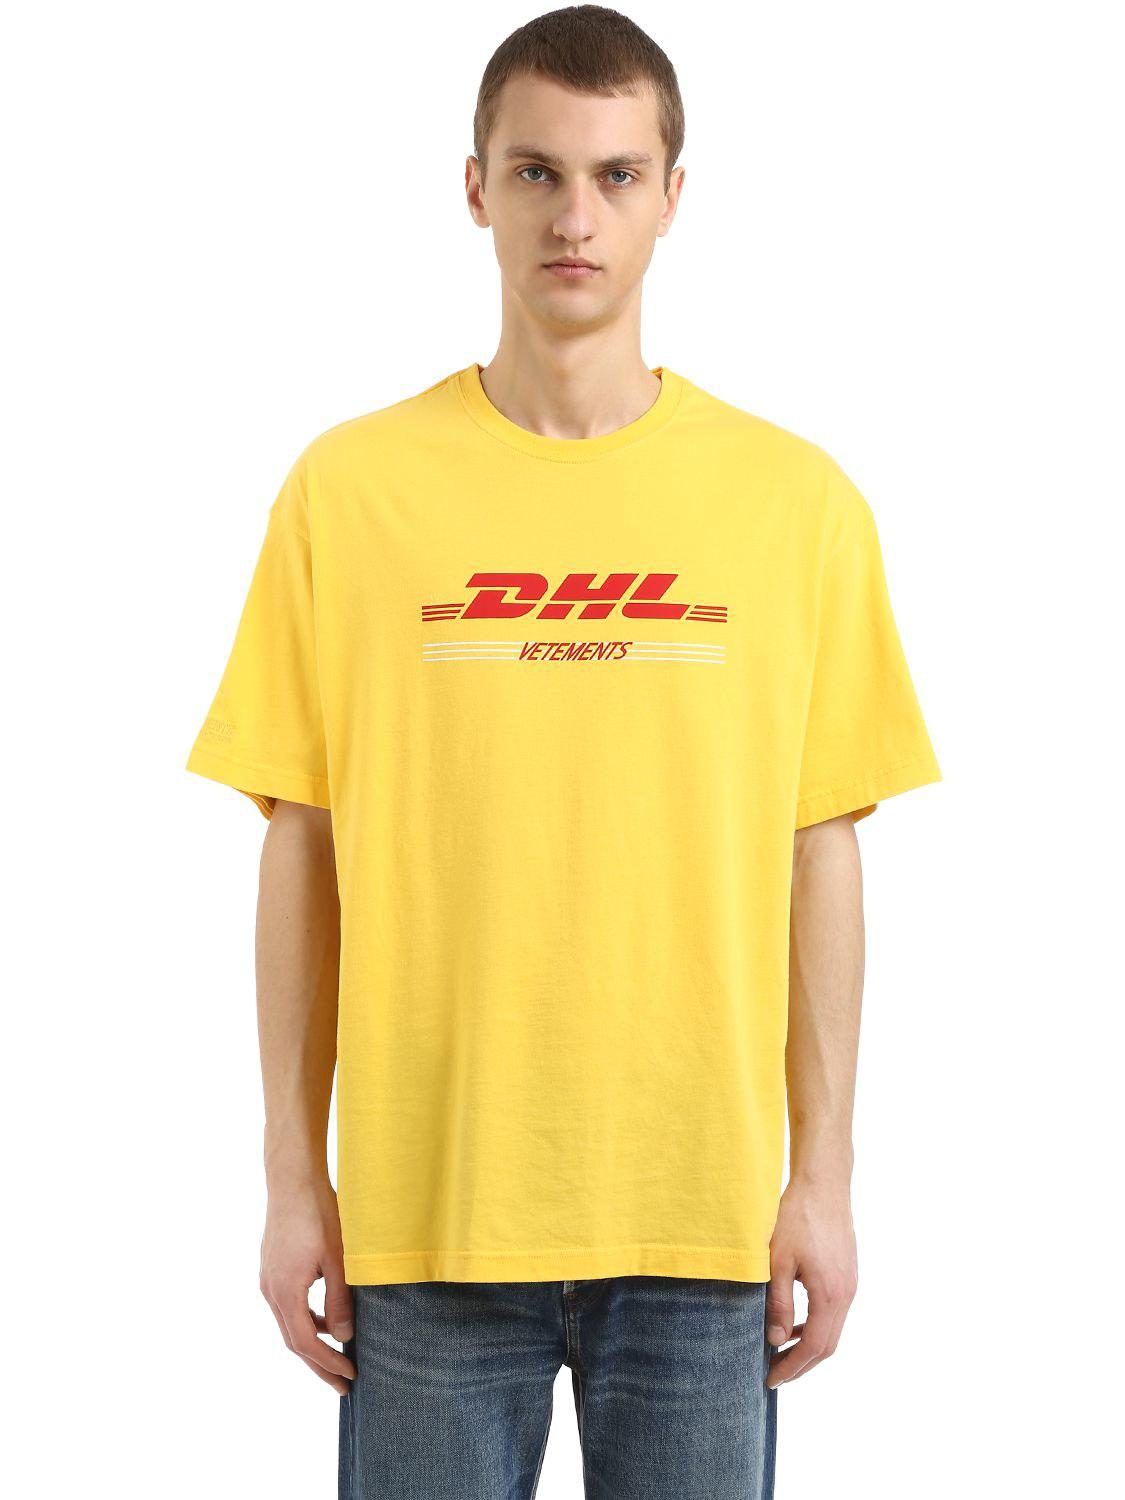 Vetements Dhl Cotton Jersey Double T-shirt in s-m-l (Yellow) for Men | Lyst  Canada